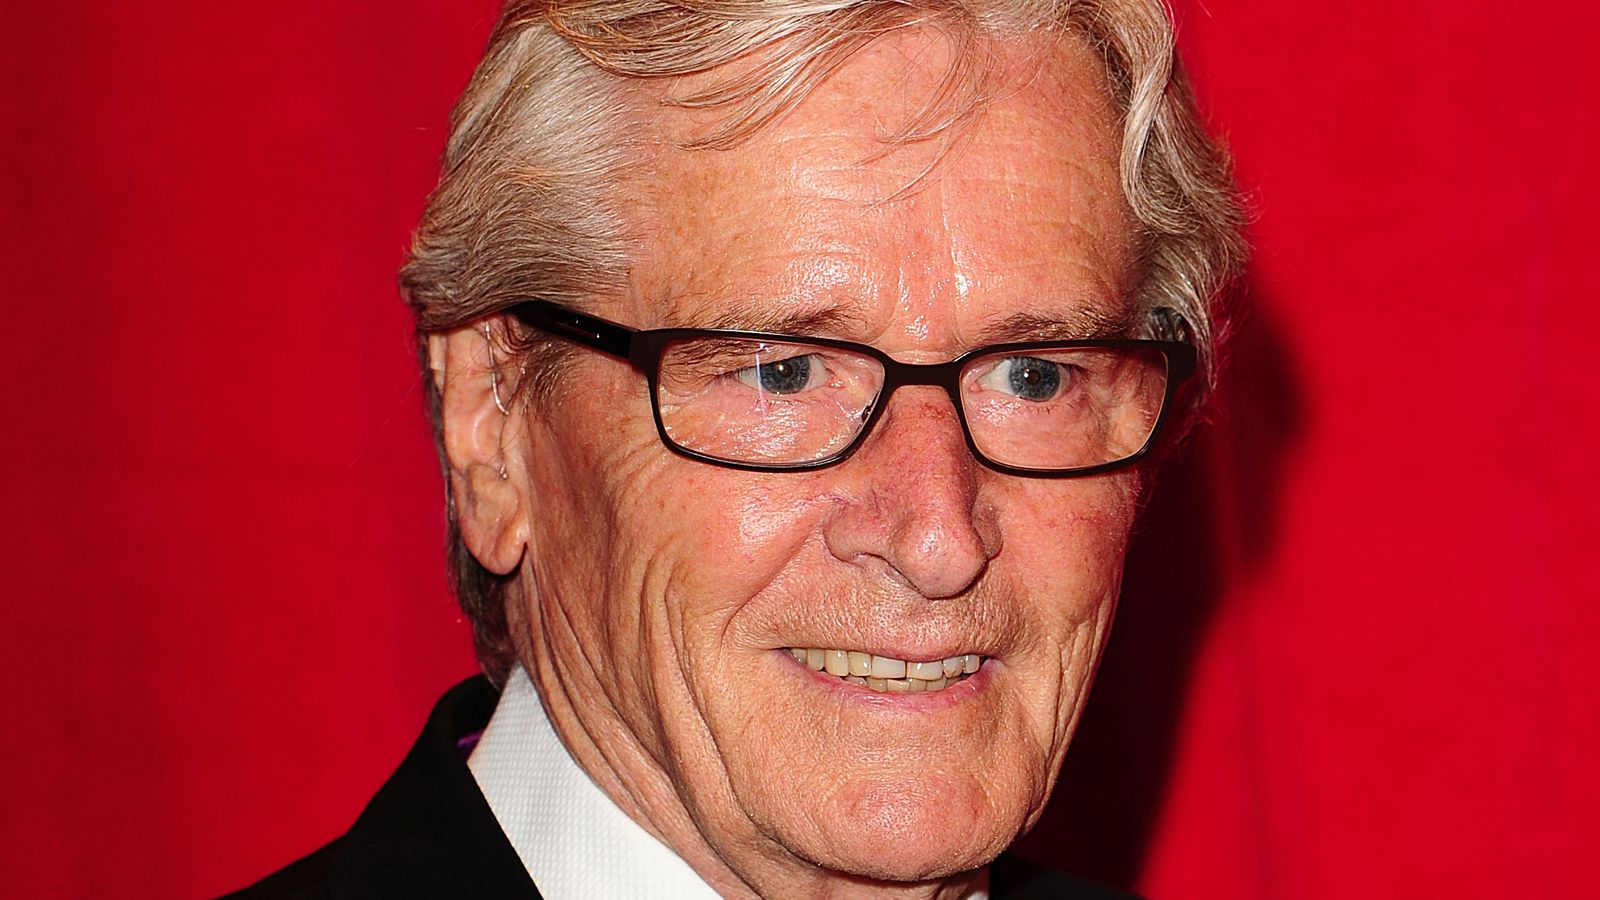 Coronation Street star William Roache given three months to settle tax debts